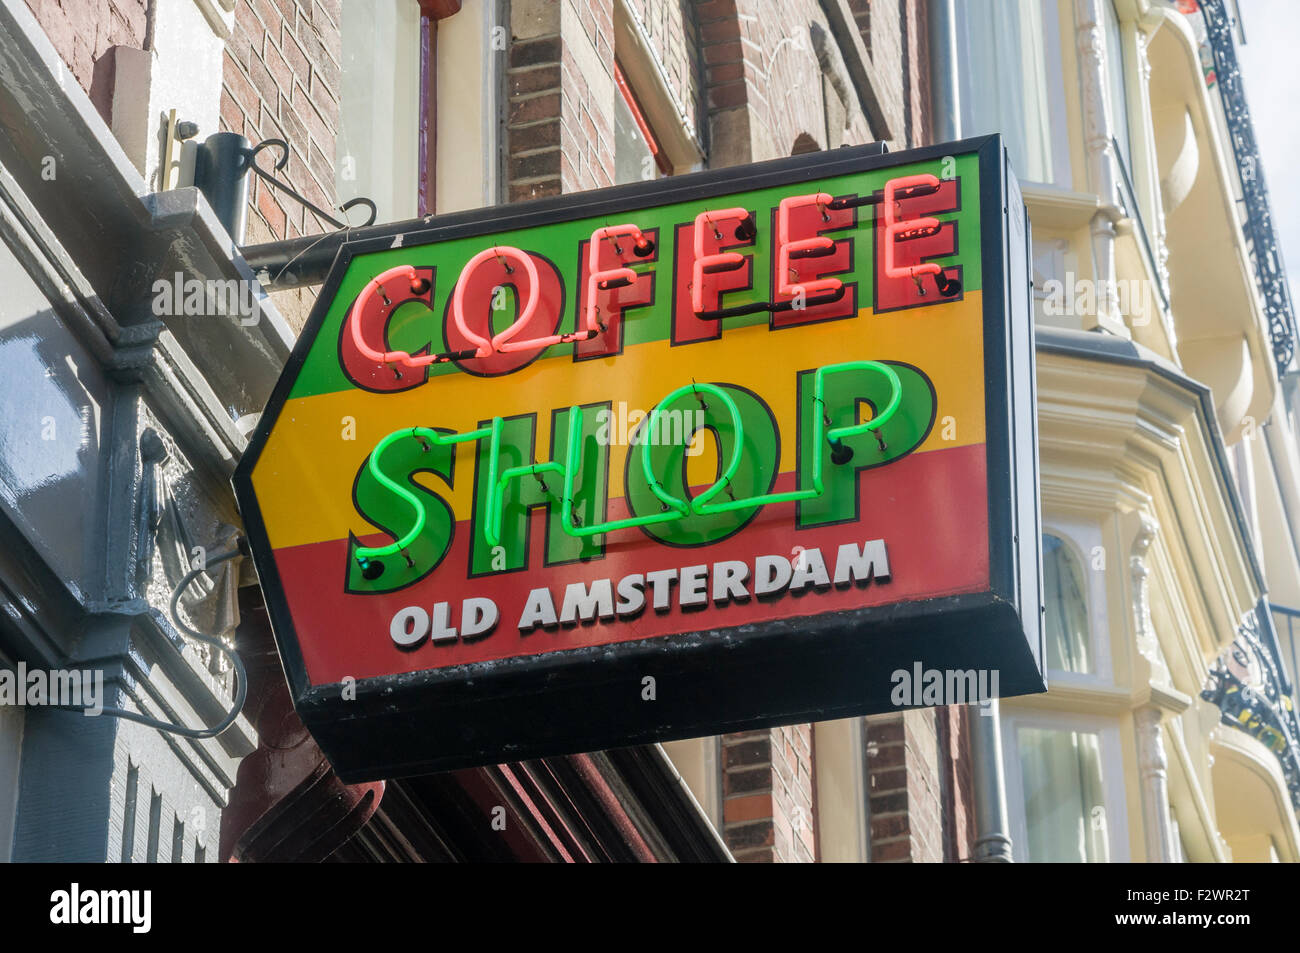 Sign for Old Amsterdam Coffee Shop Stock Photo